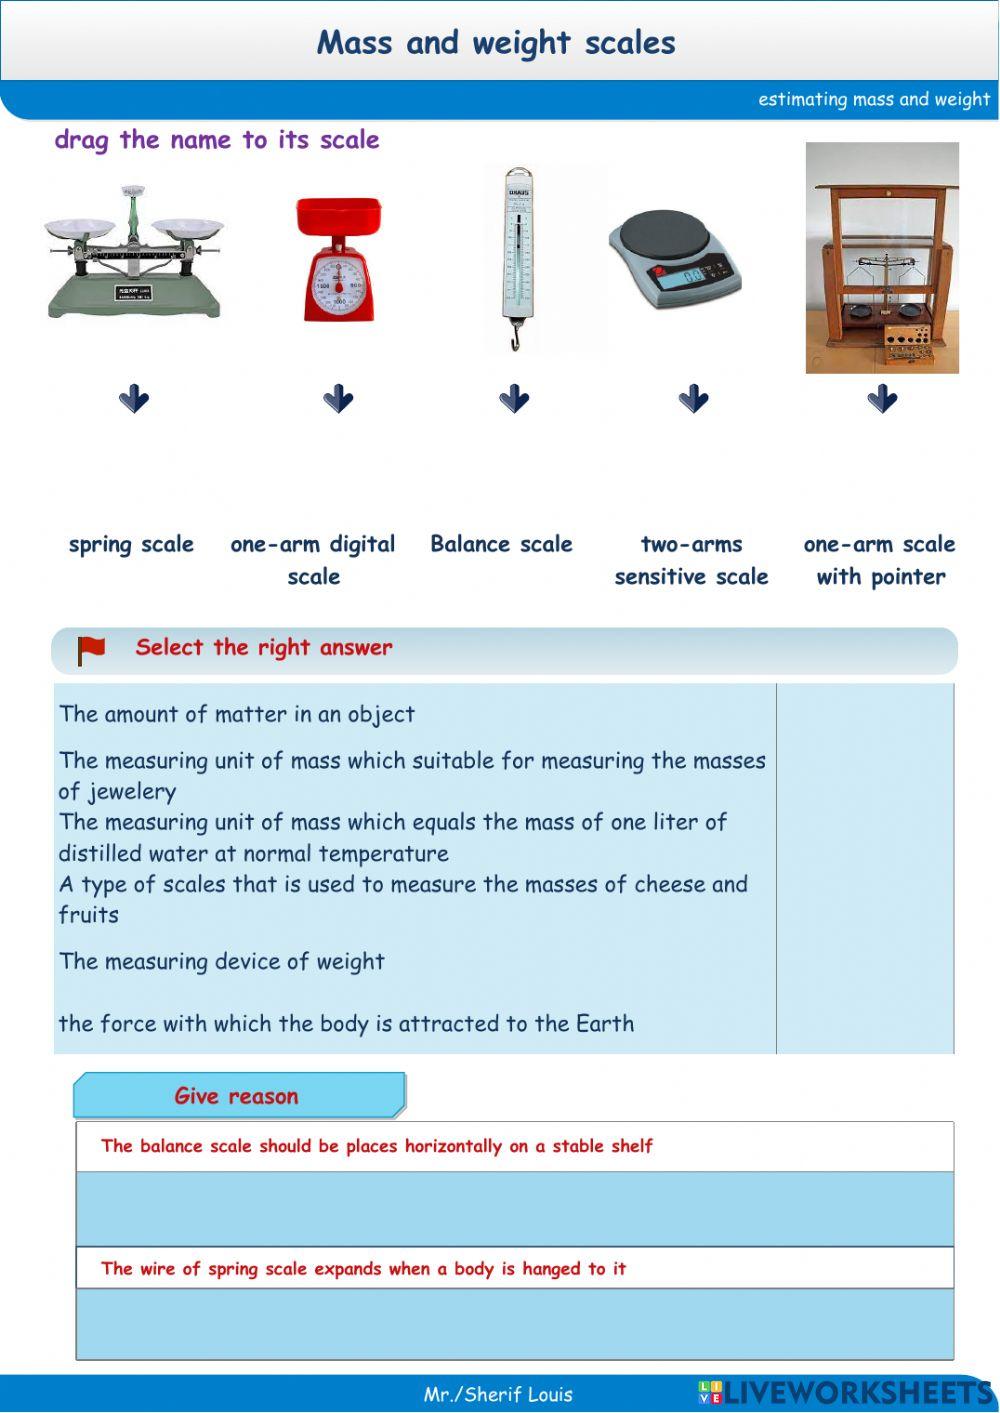 Weight and mass scales